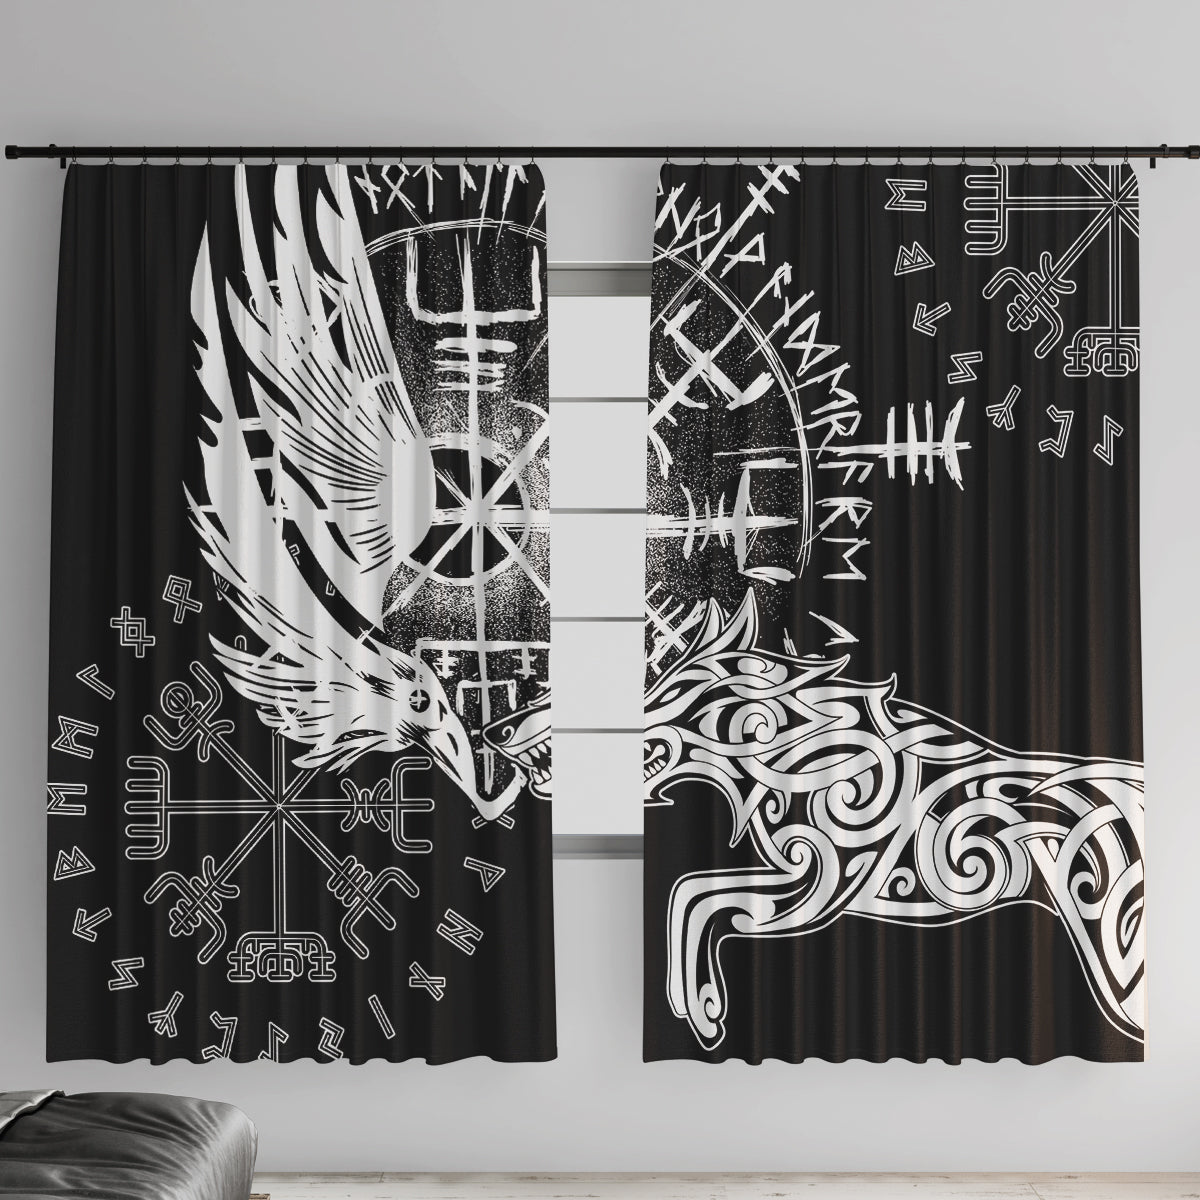 Vikings Raven and Wolf Window Curtain with Aegishjalmur Unique